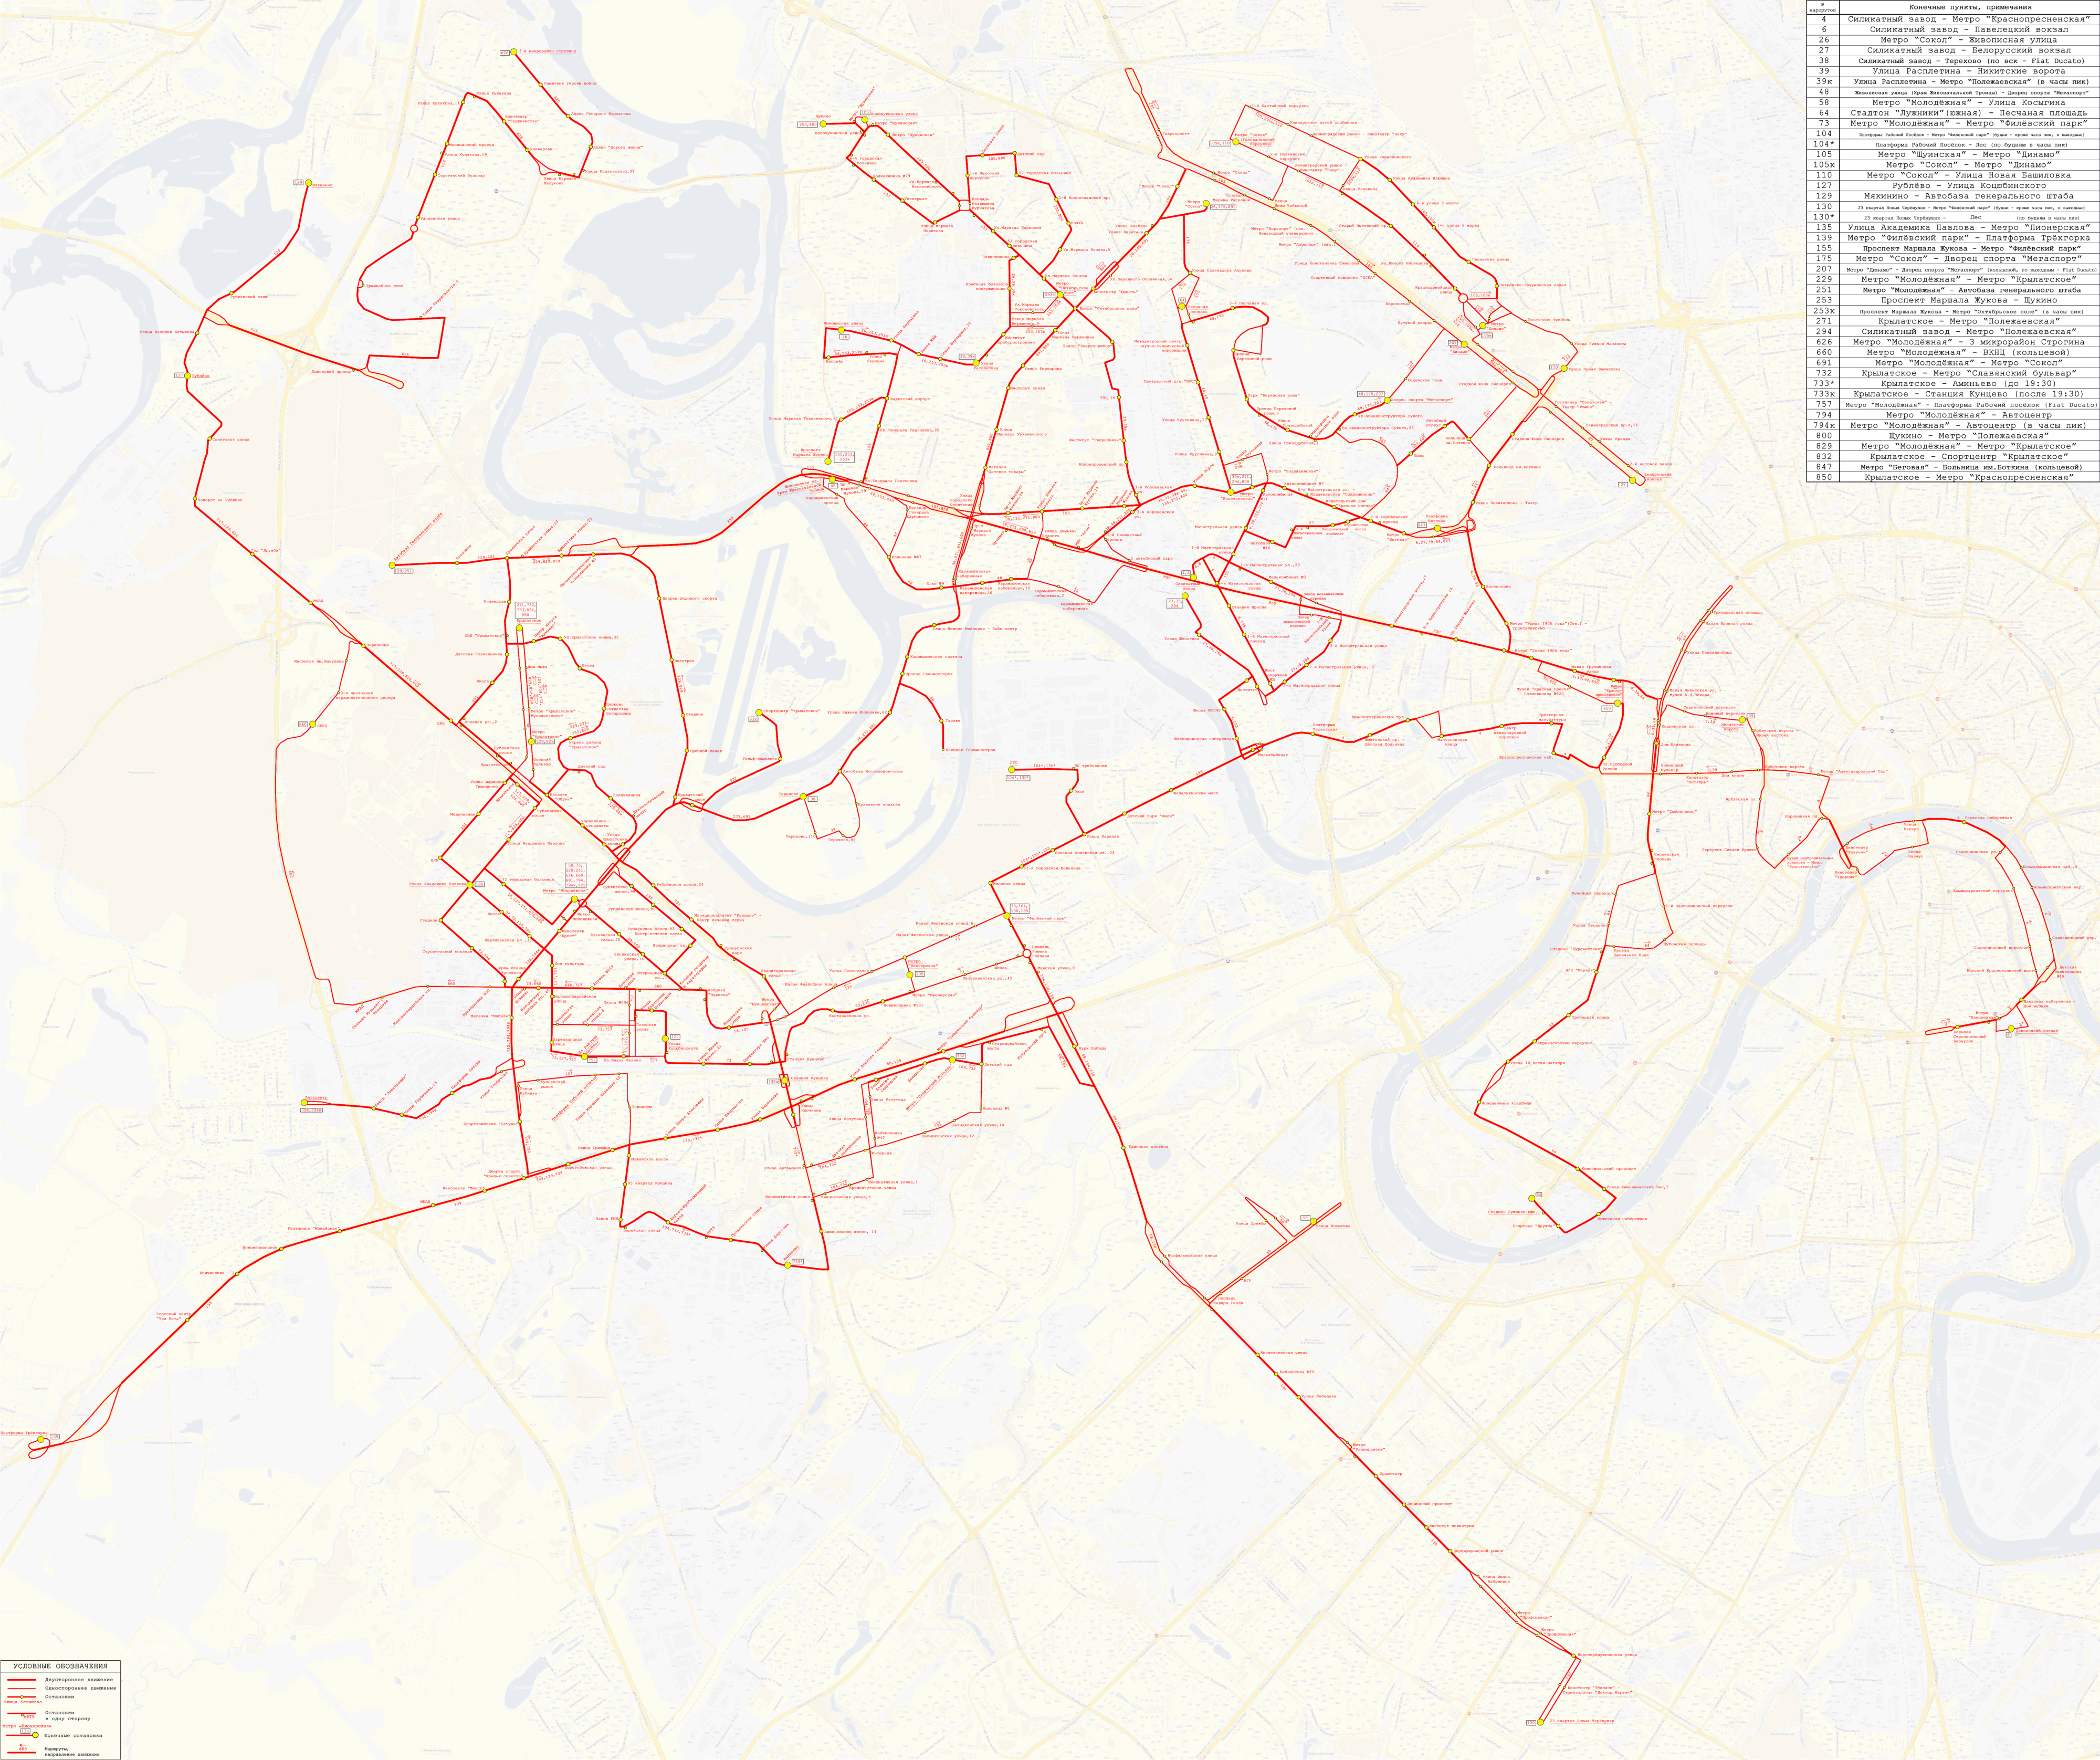 Moscow — Maps; Maps routes